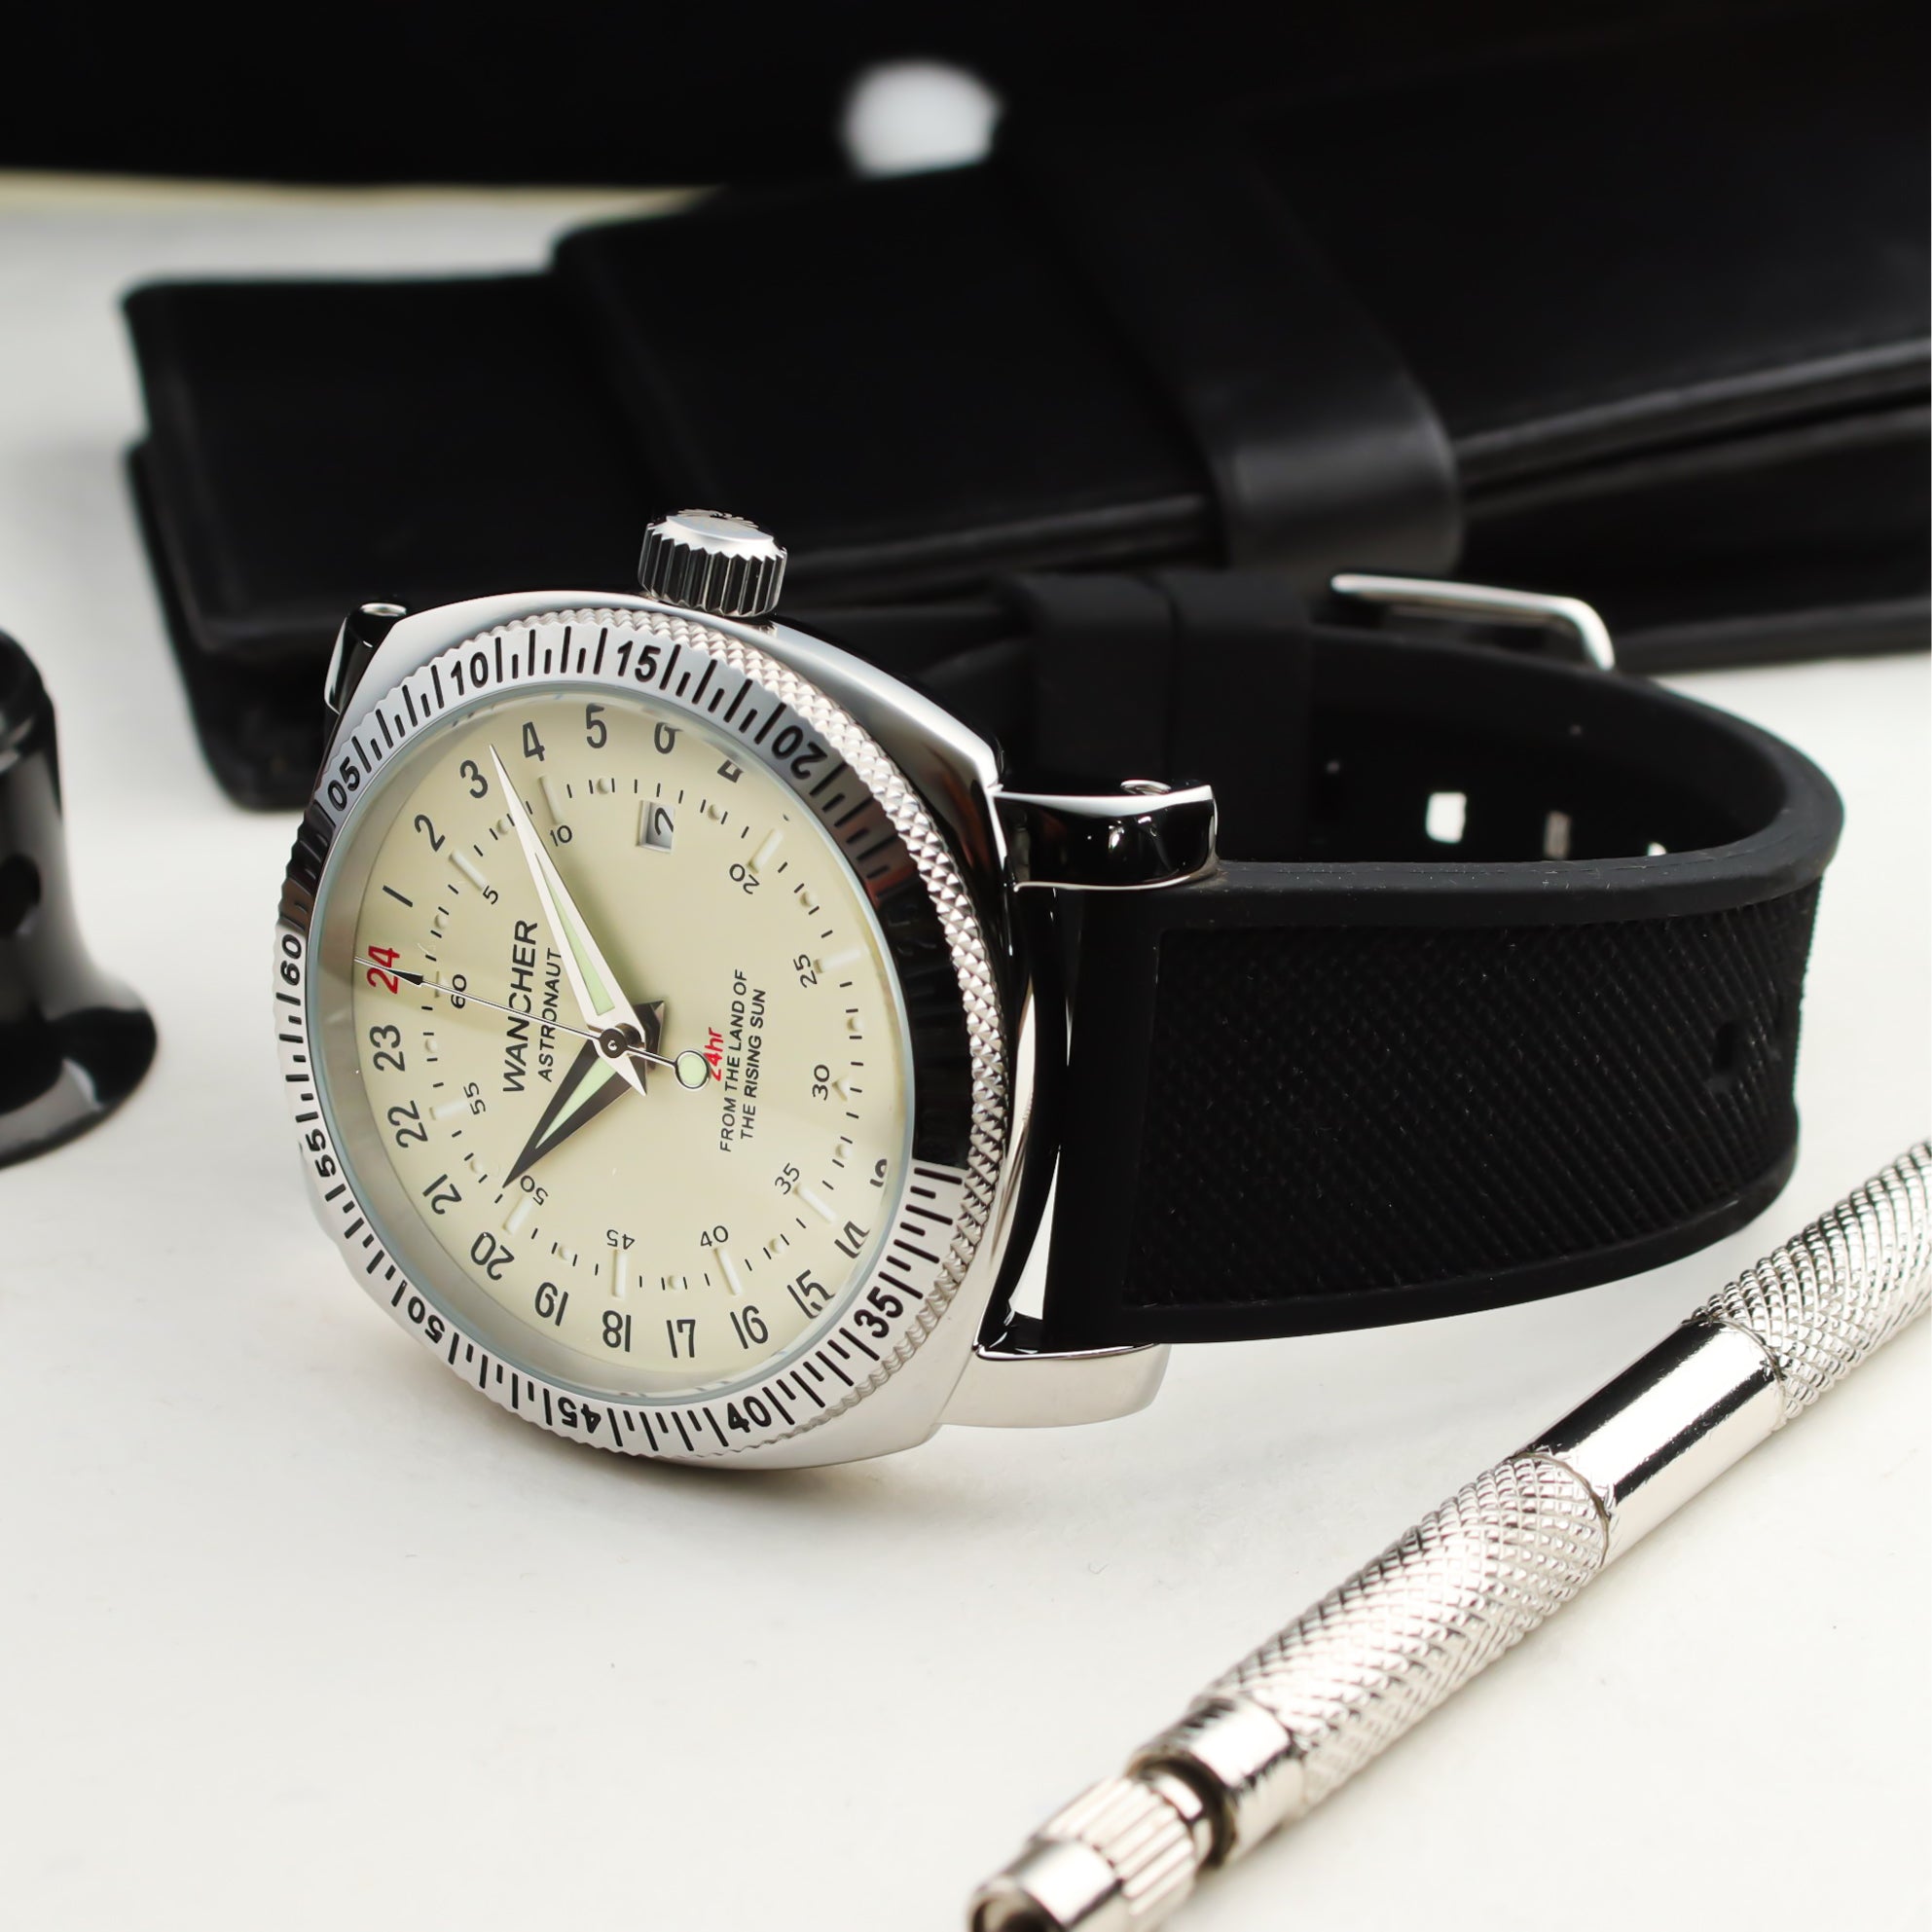 Buy Stylus watch for men.s exclusive watch Online @ ₹699 from ShopClues